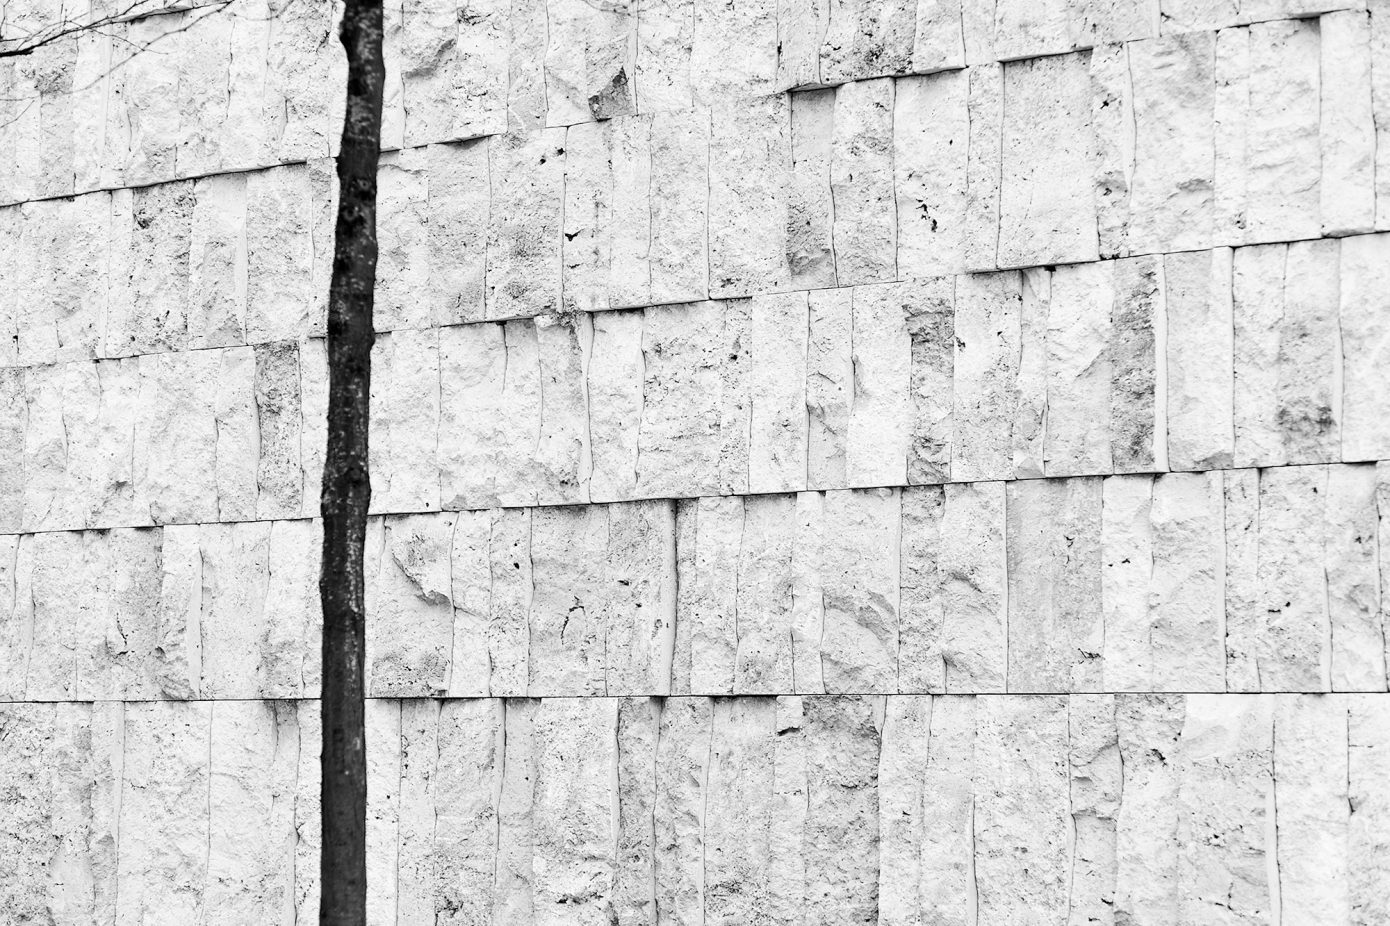 Synagogue Wall. Tagged with Black & White, Treatment, Urban